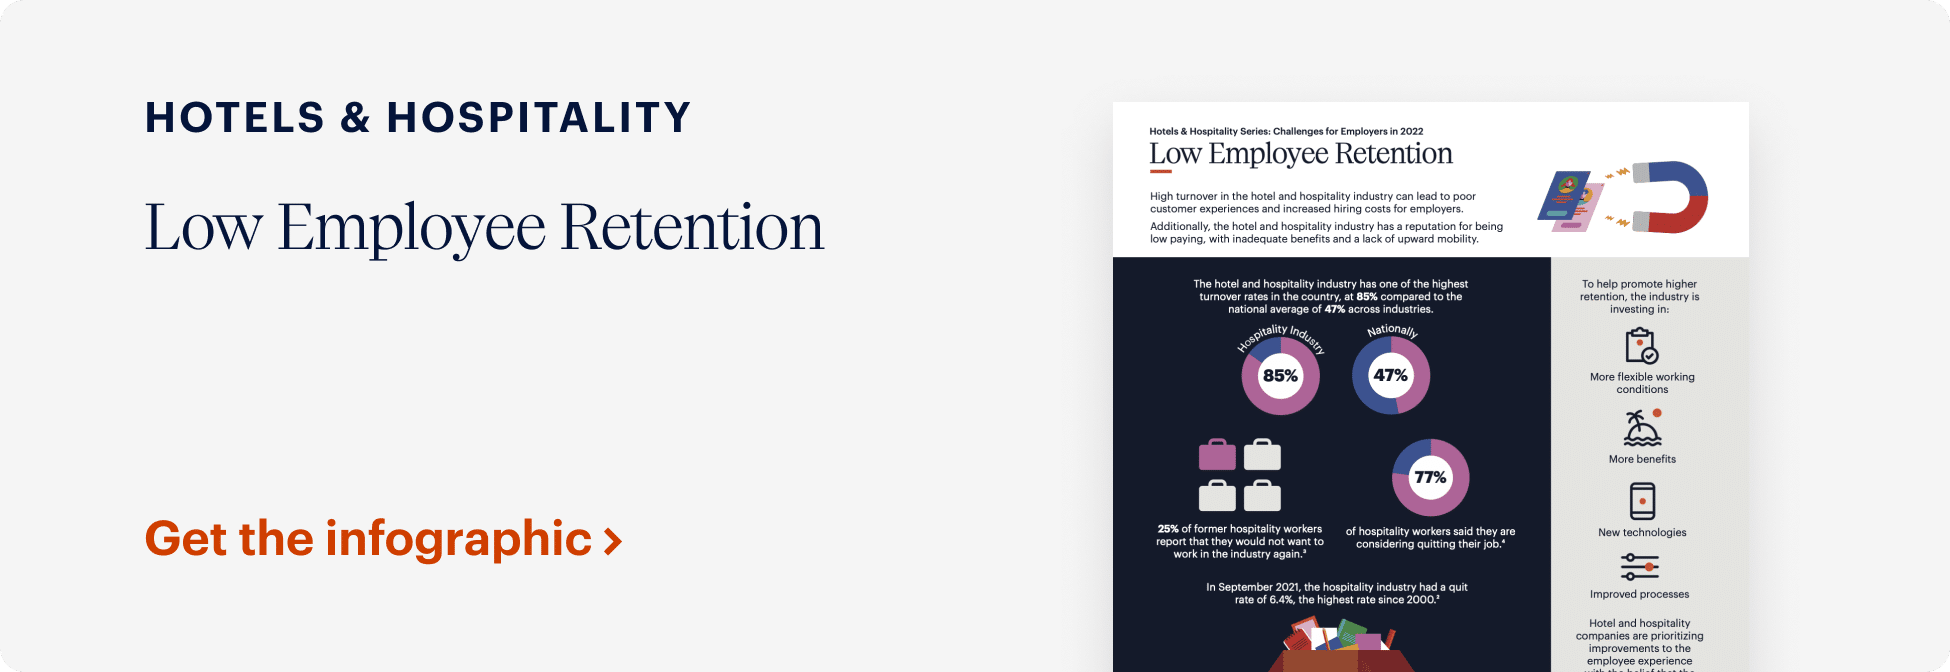 Image on the right shows an infographic about low employee retention in the hotels and hospitality industry. Text on the left reads "HOTELS & HOSPITALITY Low Employee Retention." There is a "Get the infographic" button.